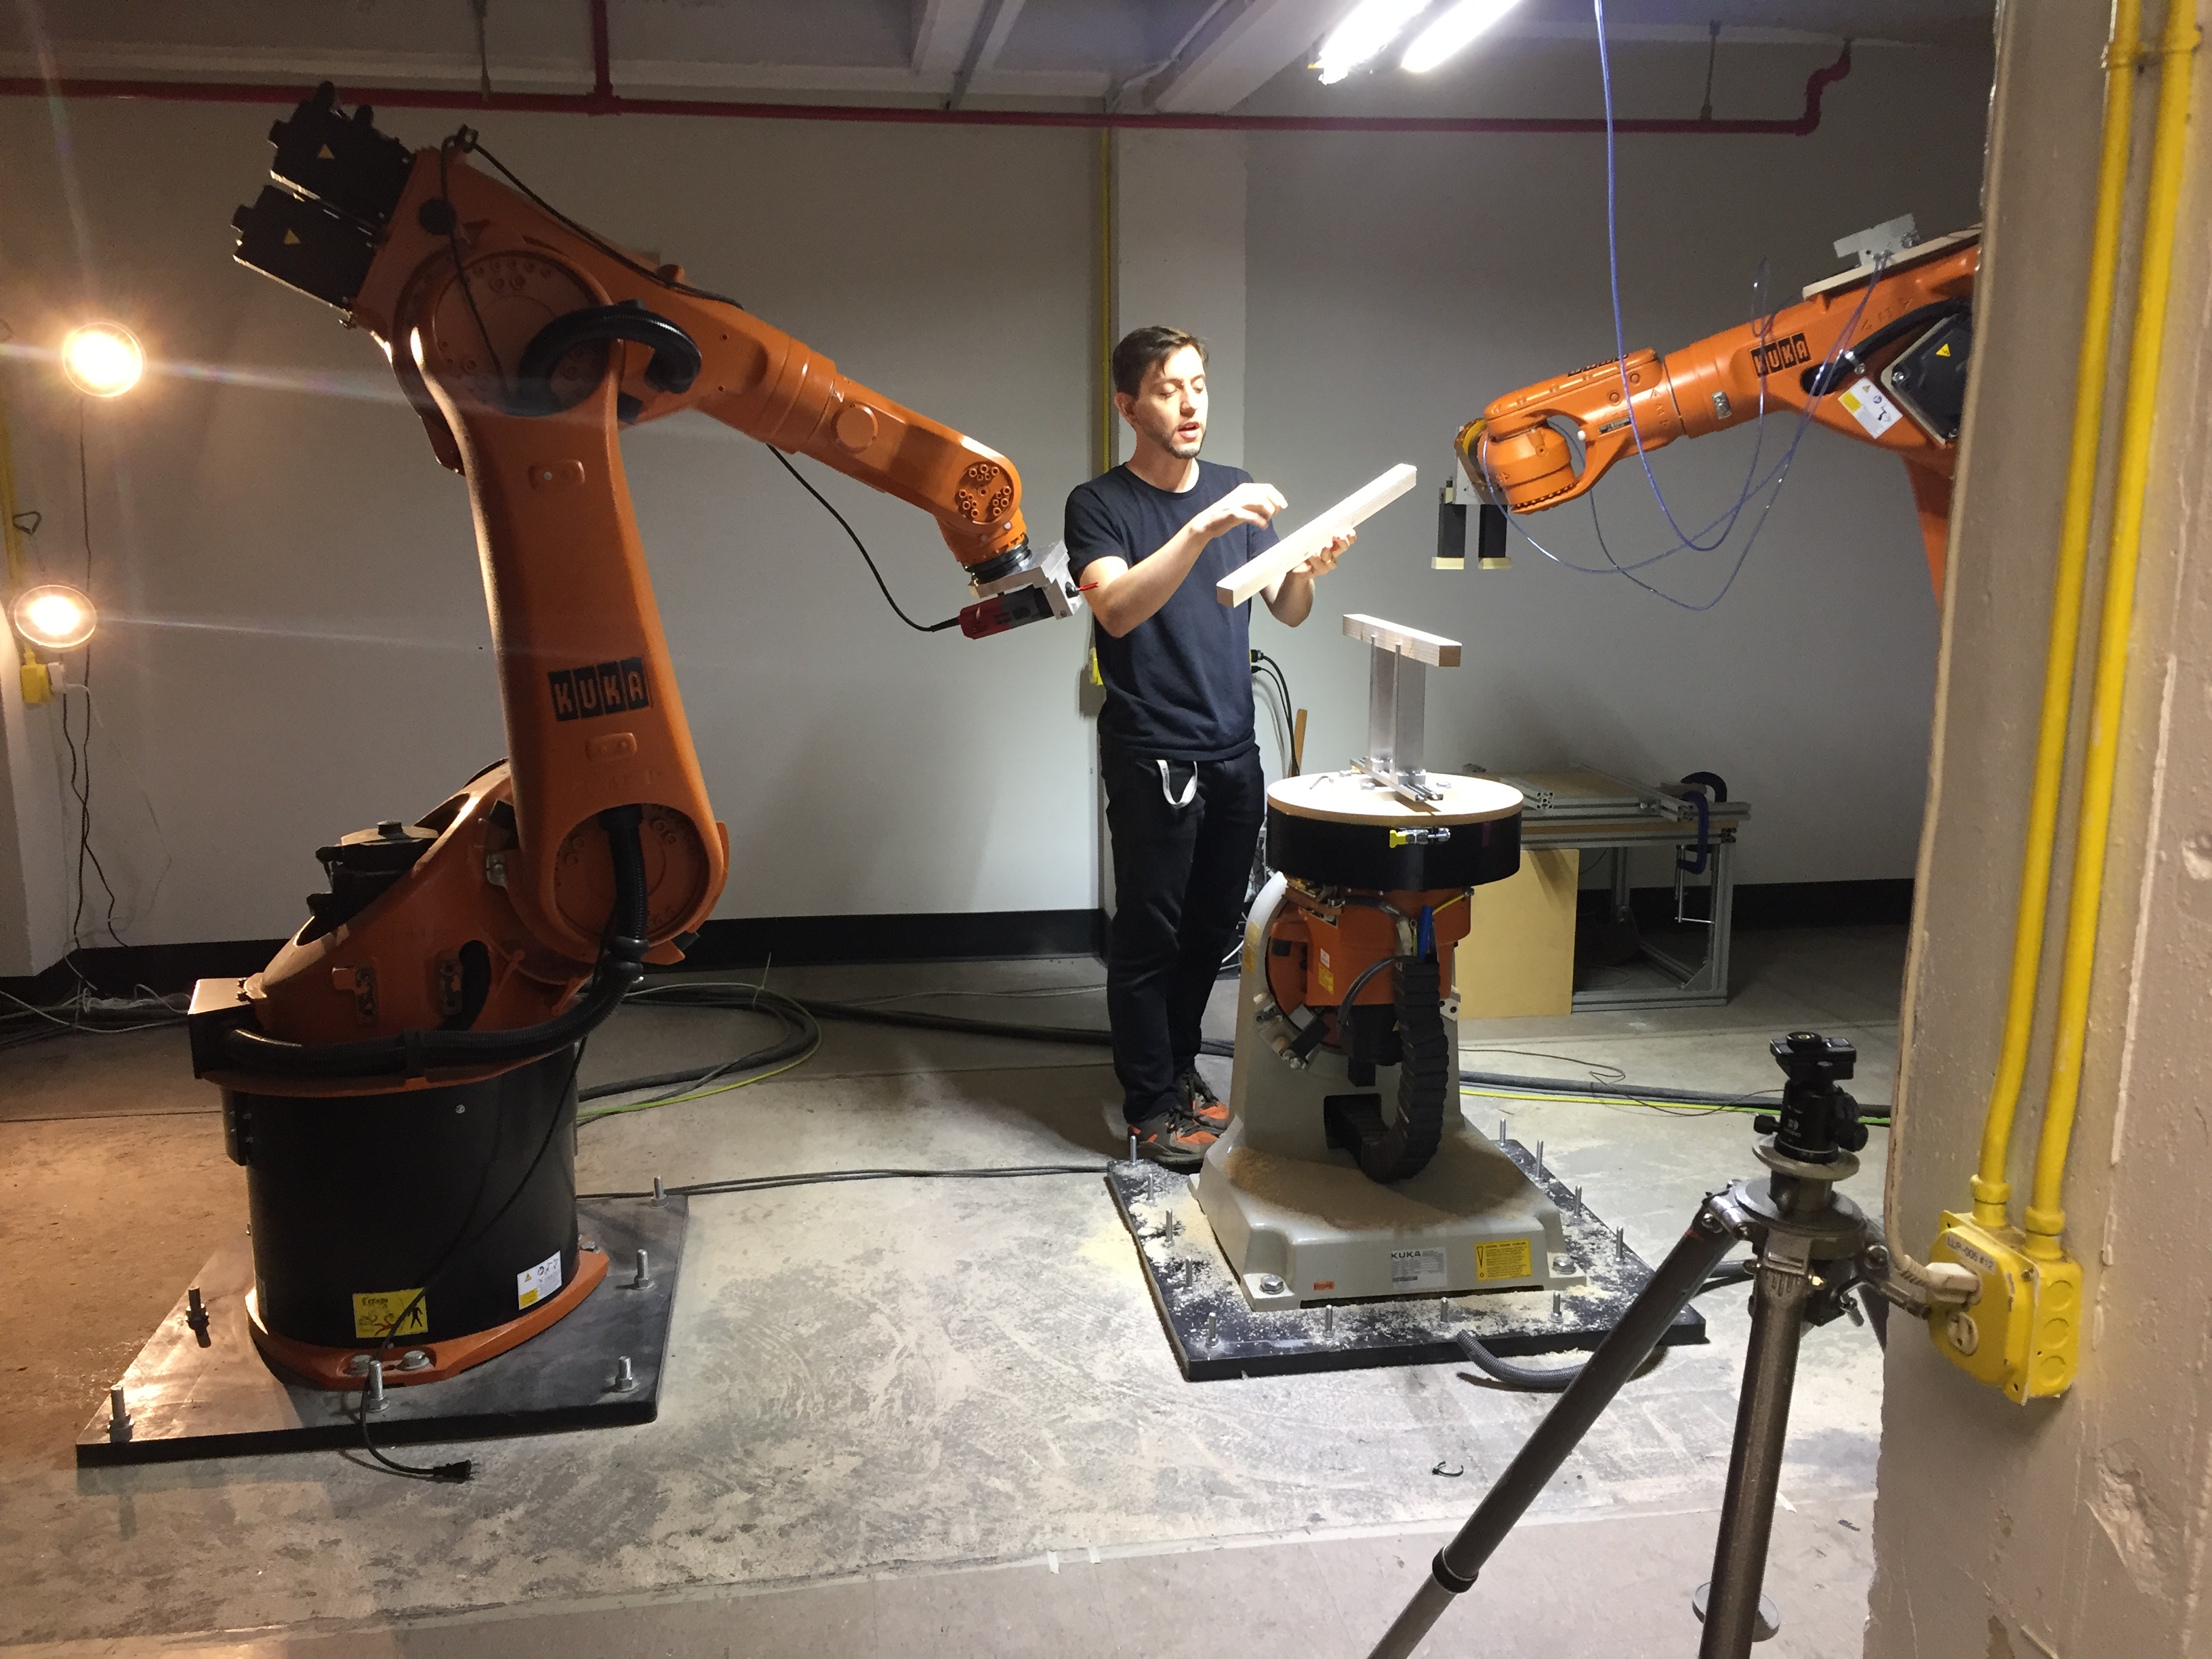 Student interacting with the school's two KUKA robotic arms